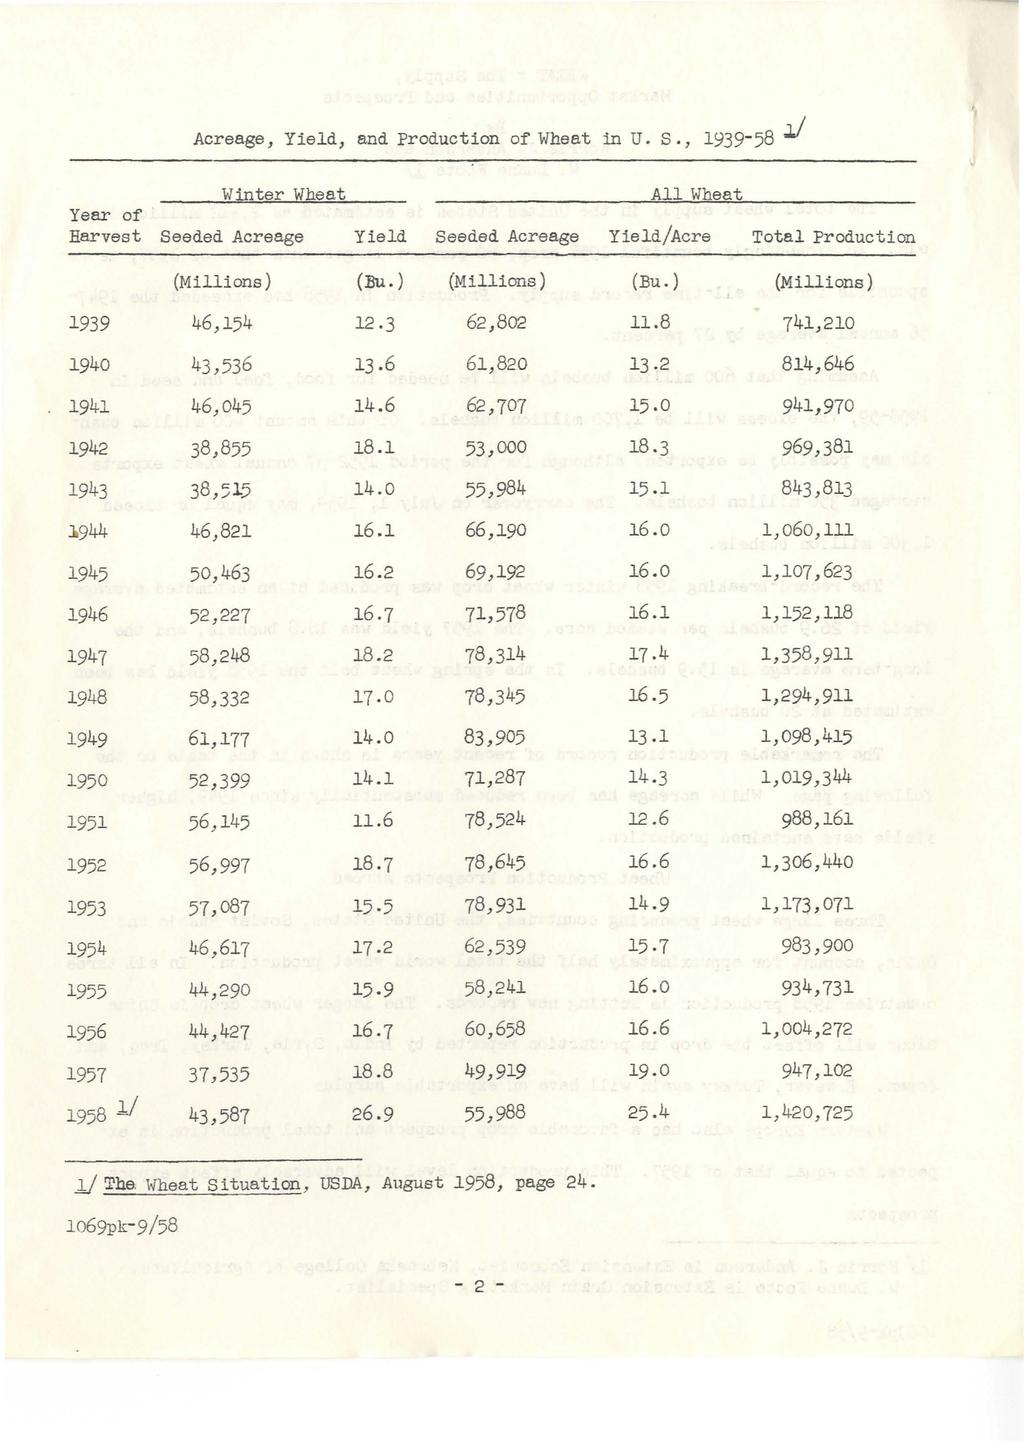 Acreage, Yield, and Production of Wheat in U.s., 1939-58 J! Winter Wheat All Wheat Year of Harvest Seeded Acreage Yield Seeded Acreage Yield/Acre Total Production (Millions) (13u.) (Millions) (Bu.